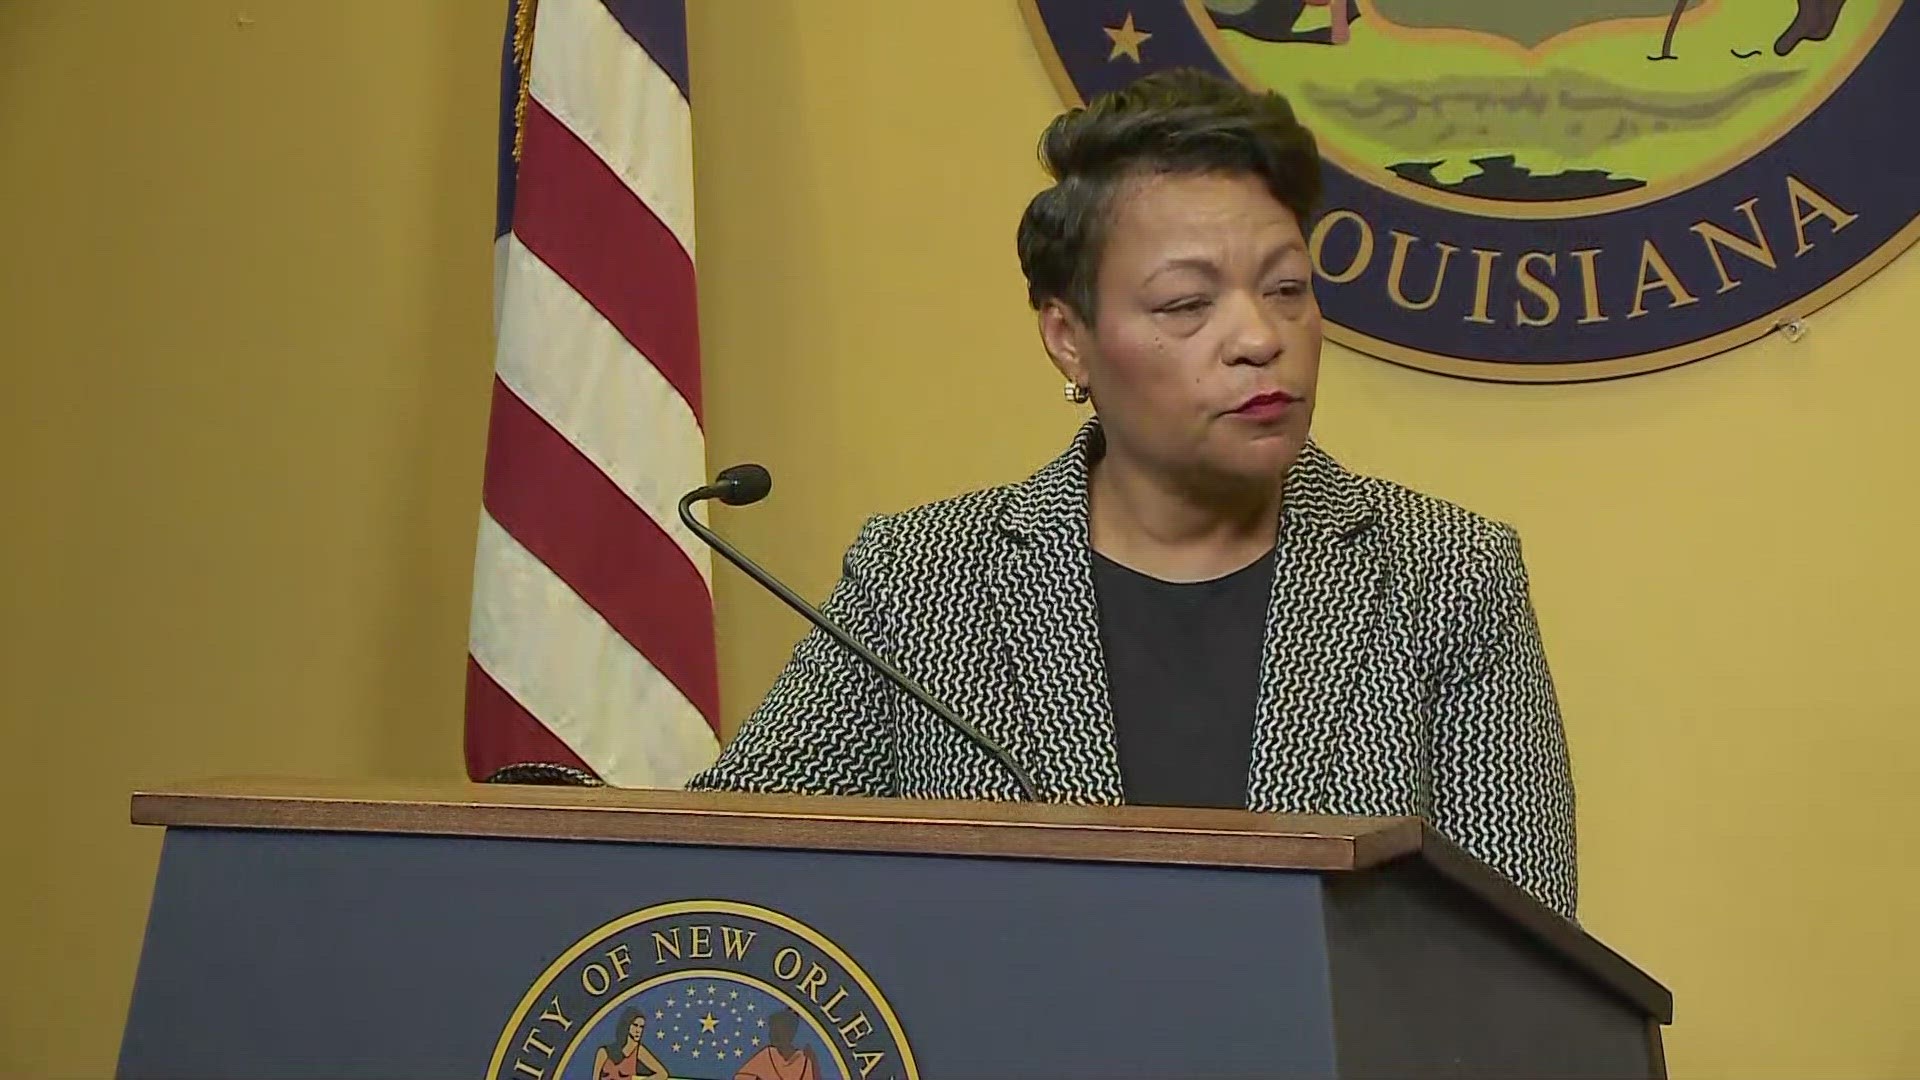 Mayor Latoya Cantrell expressed her support for her Communications Director, Gregory Joseph, a day after the New Orleans City Council called for Joseph's resignation